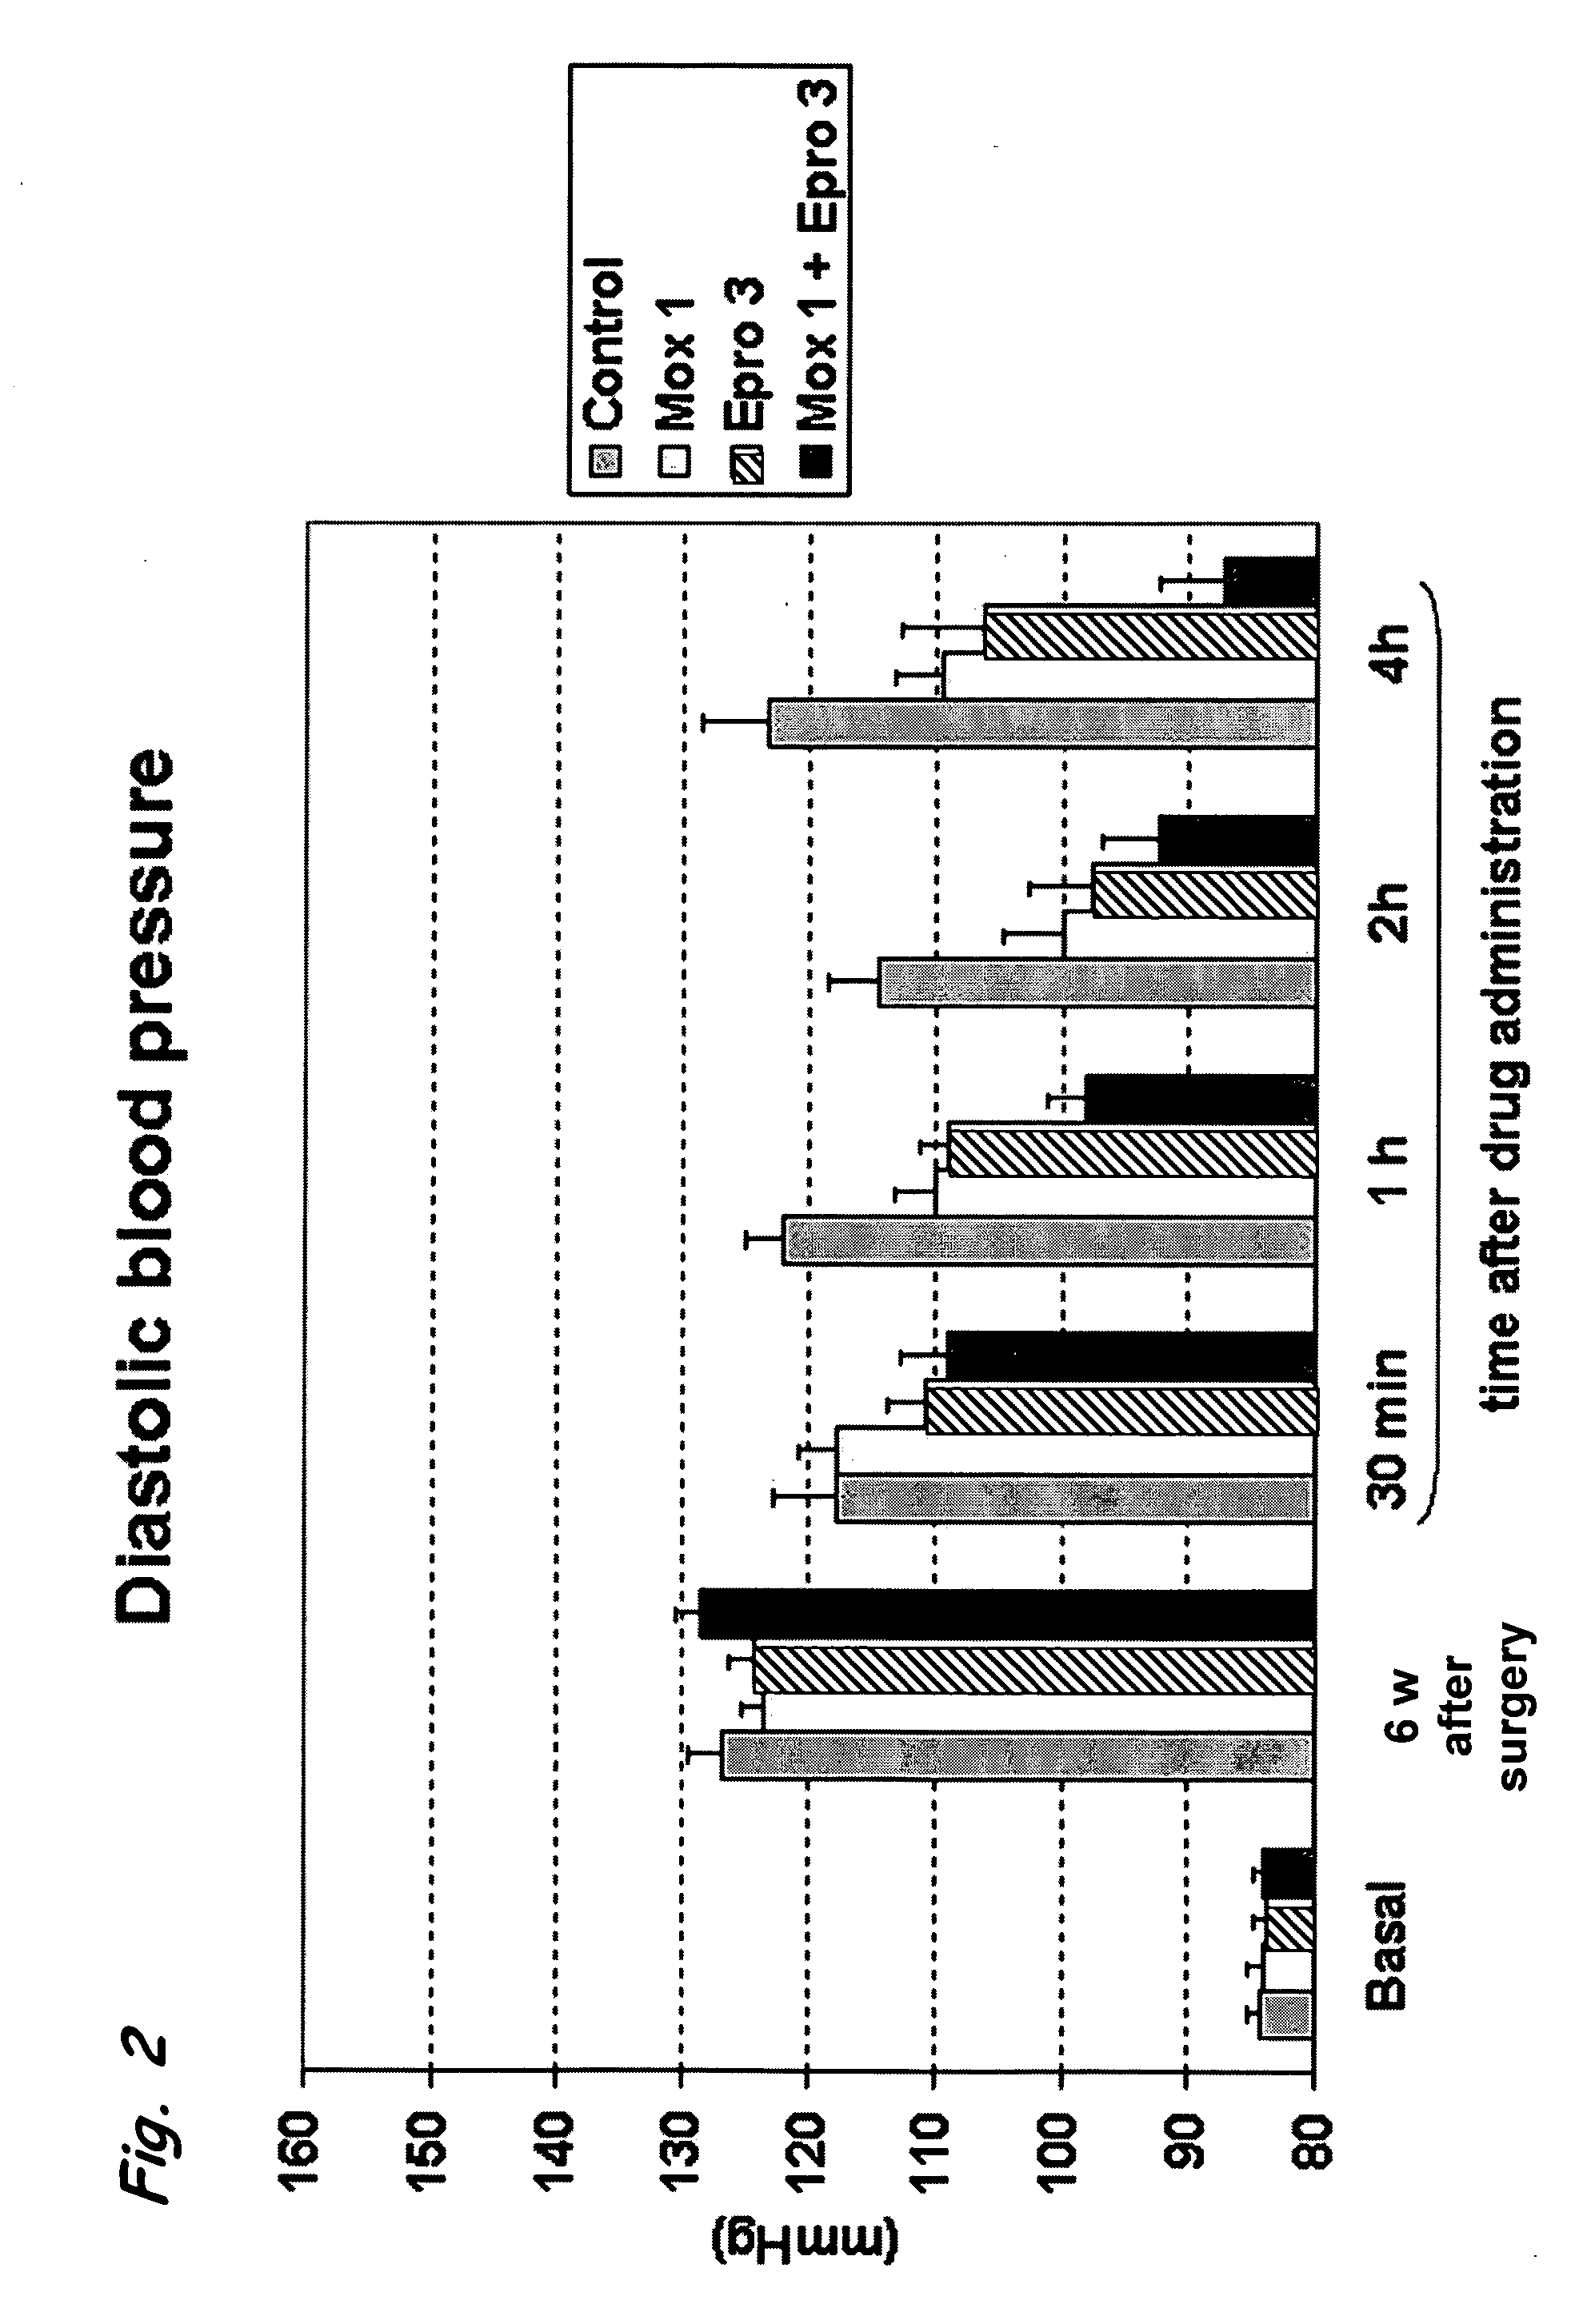 Pharmaceutical compositions comprising a selective I1 imidazoline receptor agonist and an angiotensin II receptor blocker